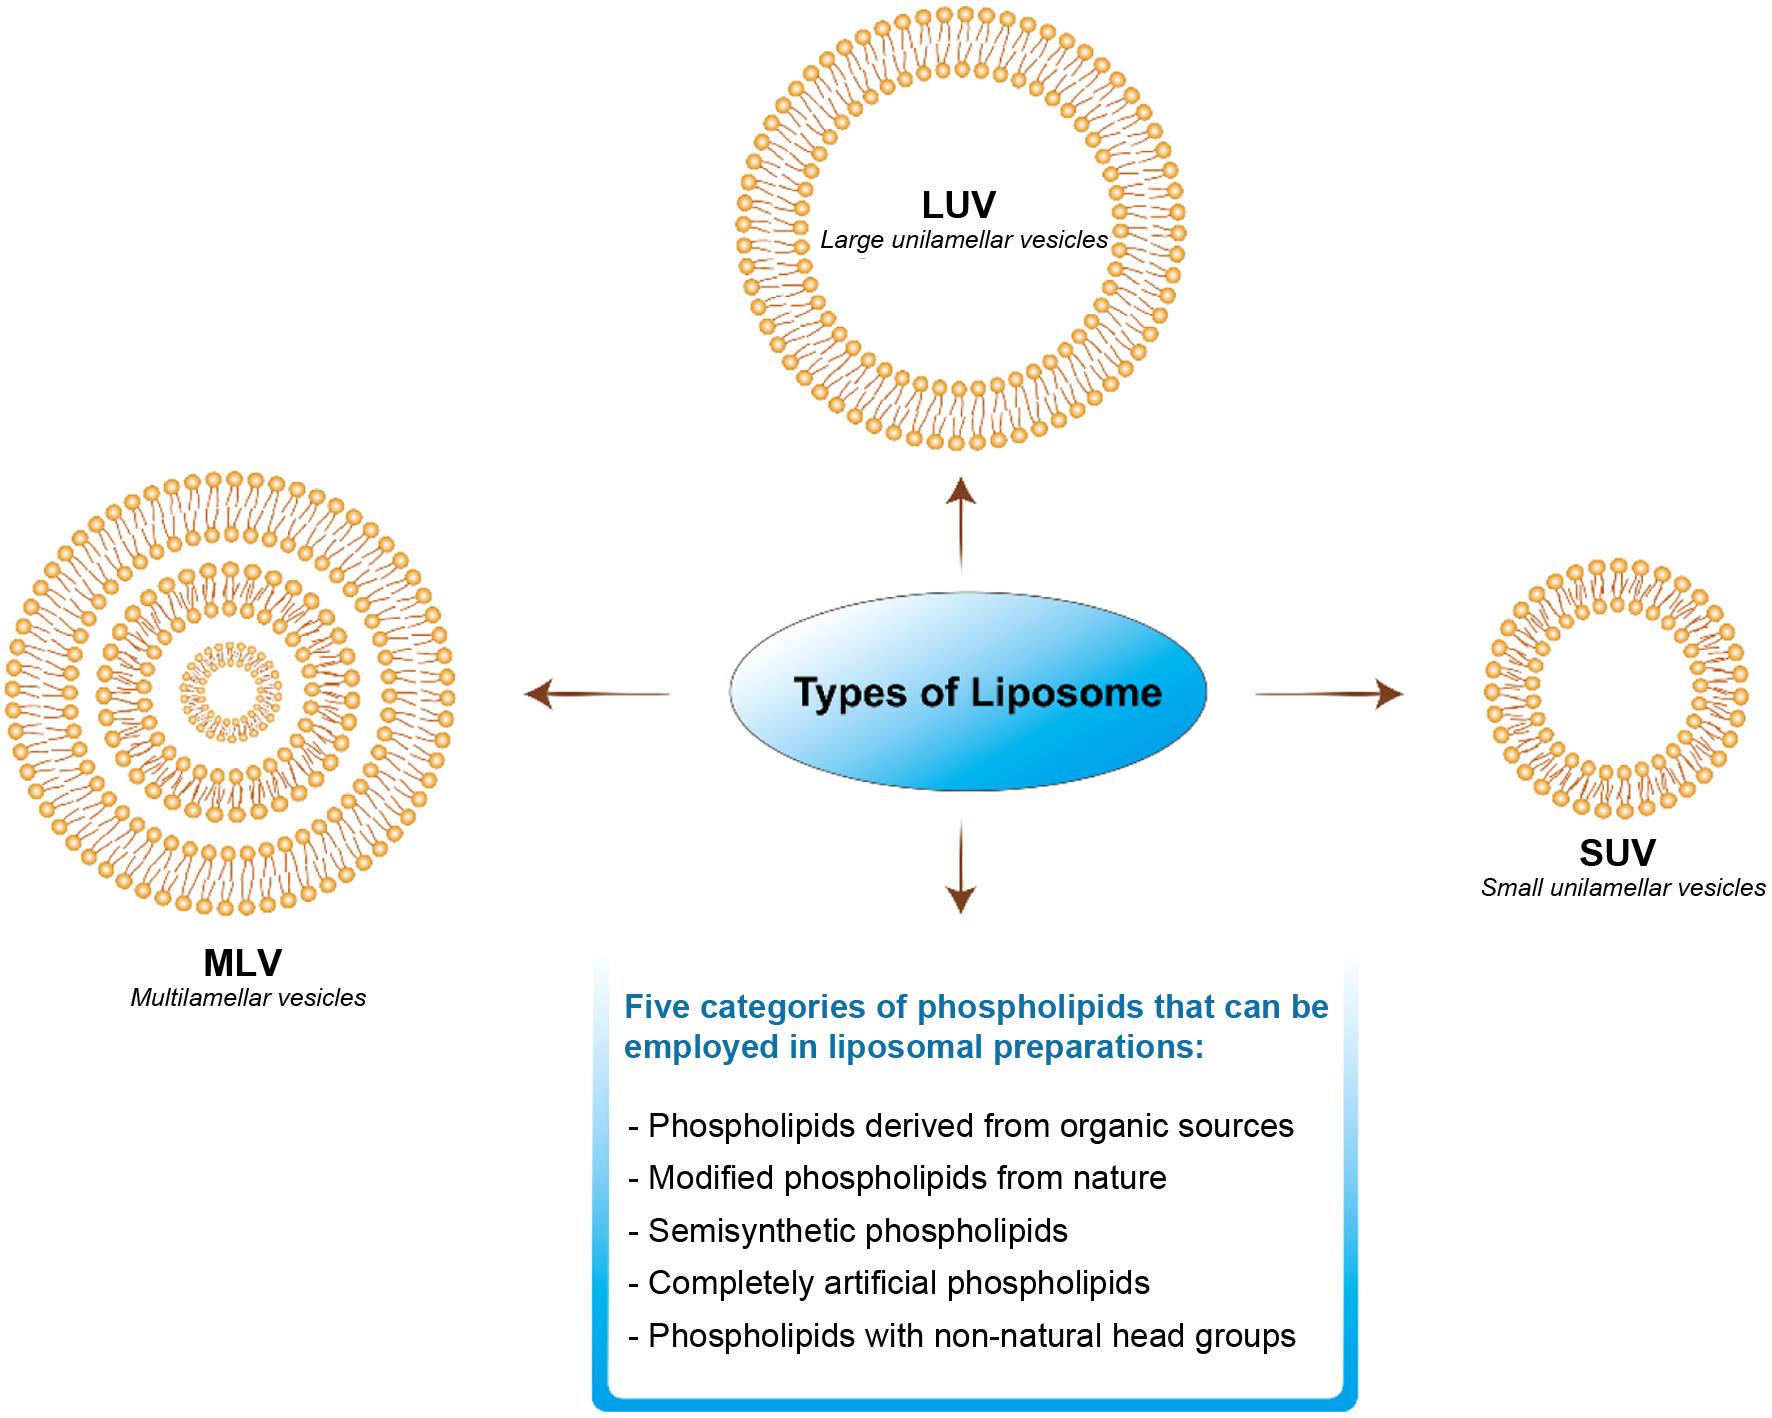 Types of liposomes with their categories of phospholipids.